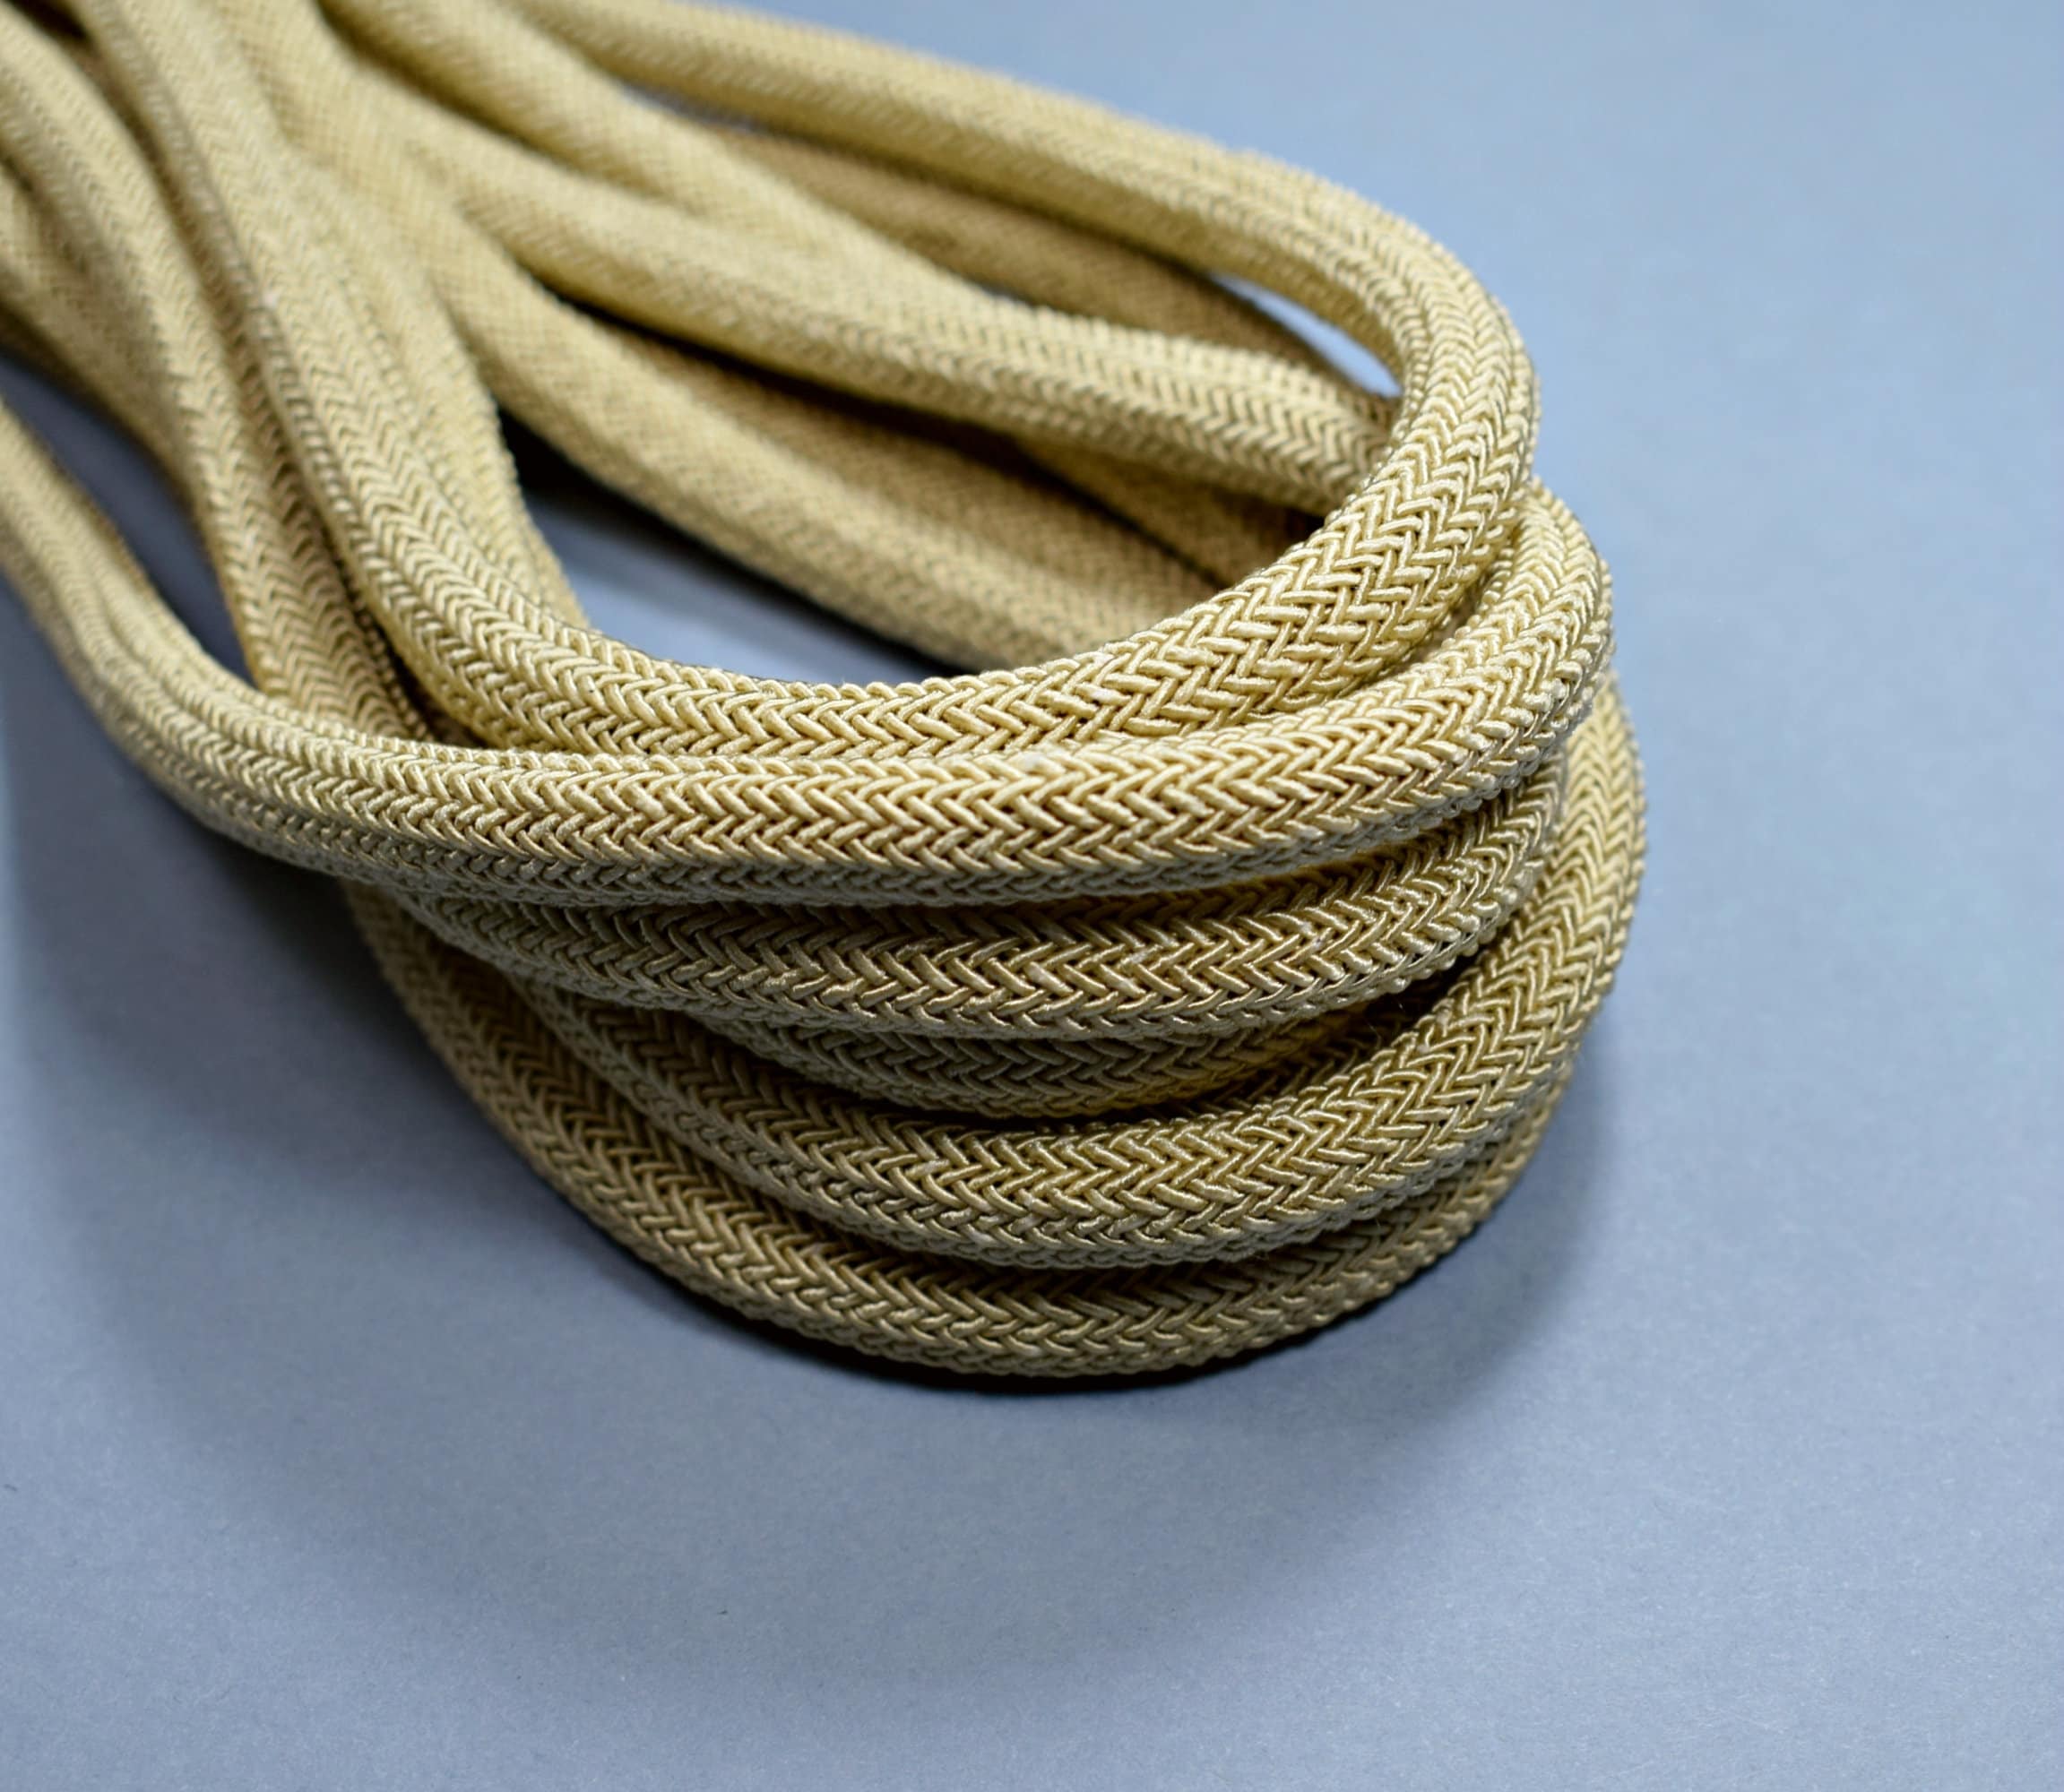 Braided Twisted Silk Ropes 8mm Diameter Soft Solid Braided Twisted Ropes  Decorative Twisted Satin Shiny Cord Rope for All Purpose and DIY Craft